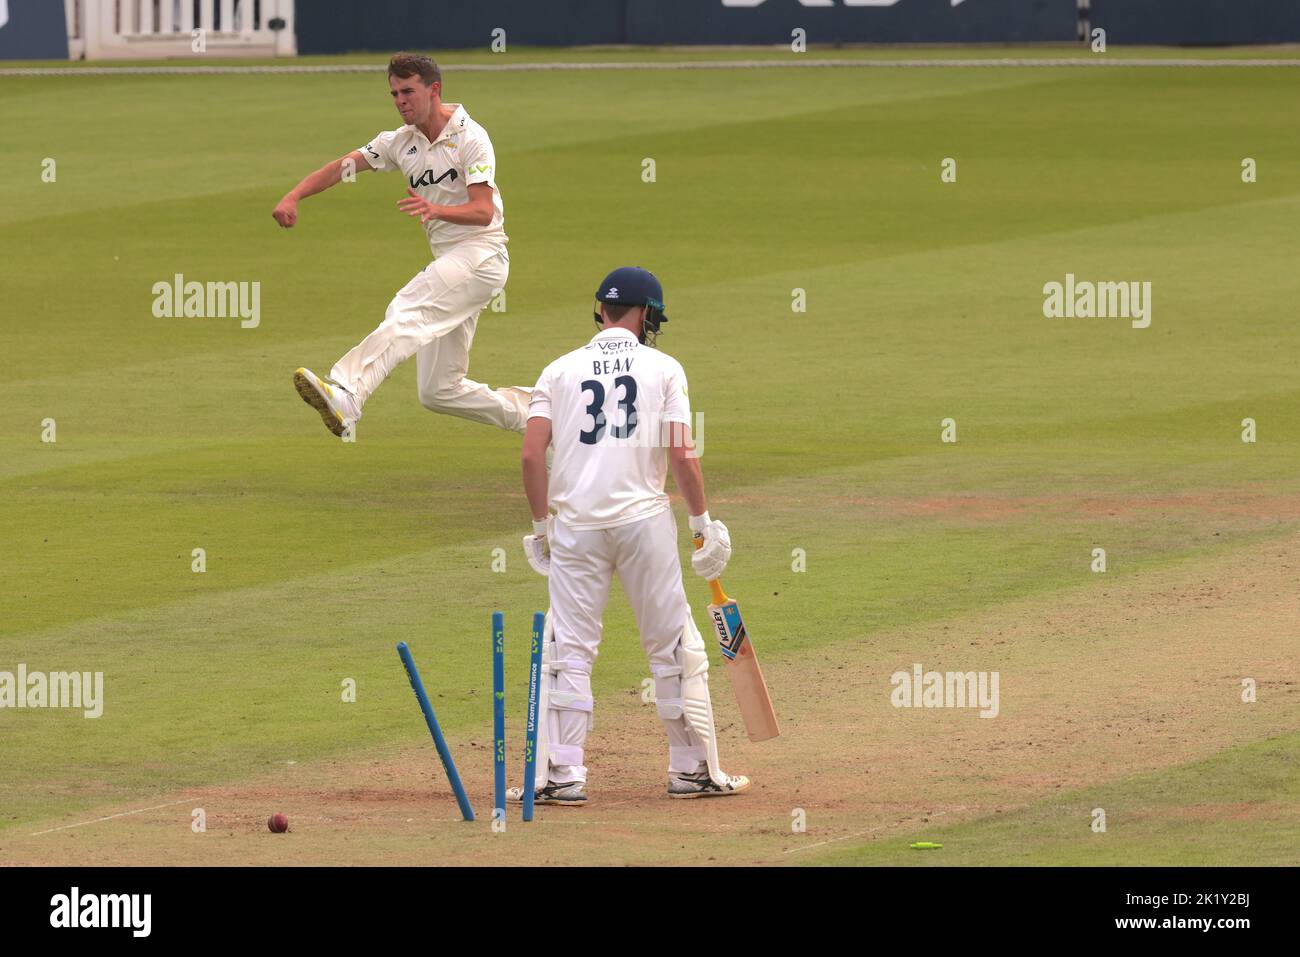 21 September, 2022. London, UK. Yorkshire’s Finlay Bean bowled by Surrey’s Tom Lawes as Surrey take on Yorkshire in the County Championship at the Kia Oval, day two. David Rowe/Alamy Live News Stock Photo